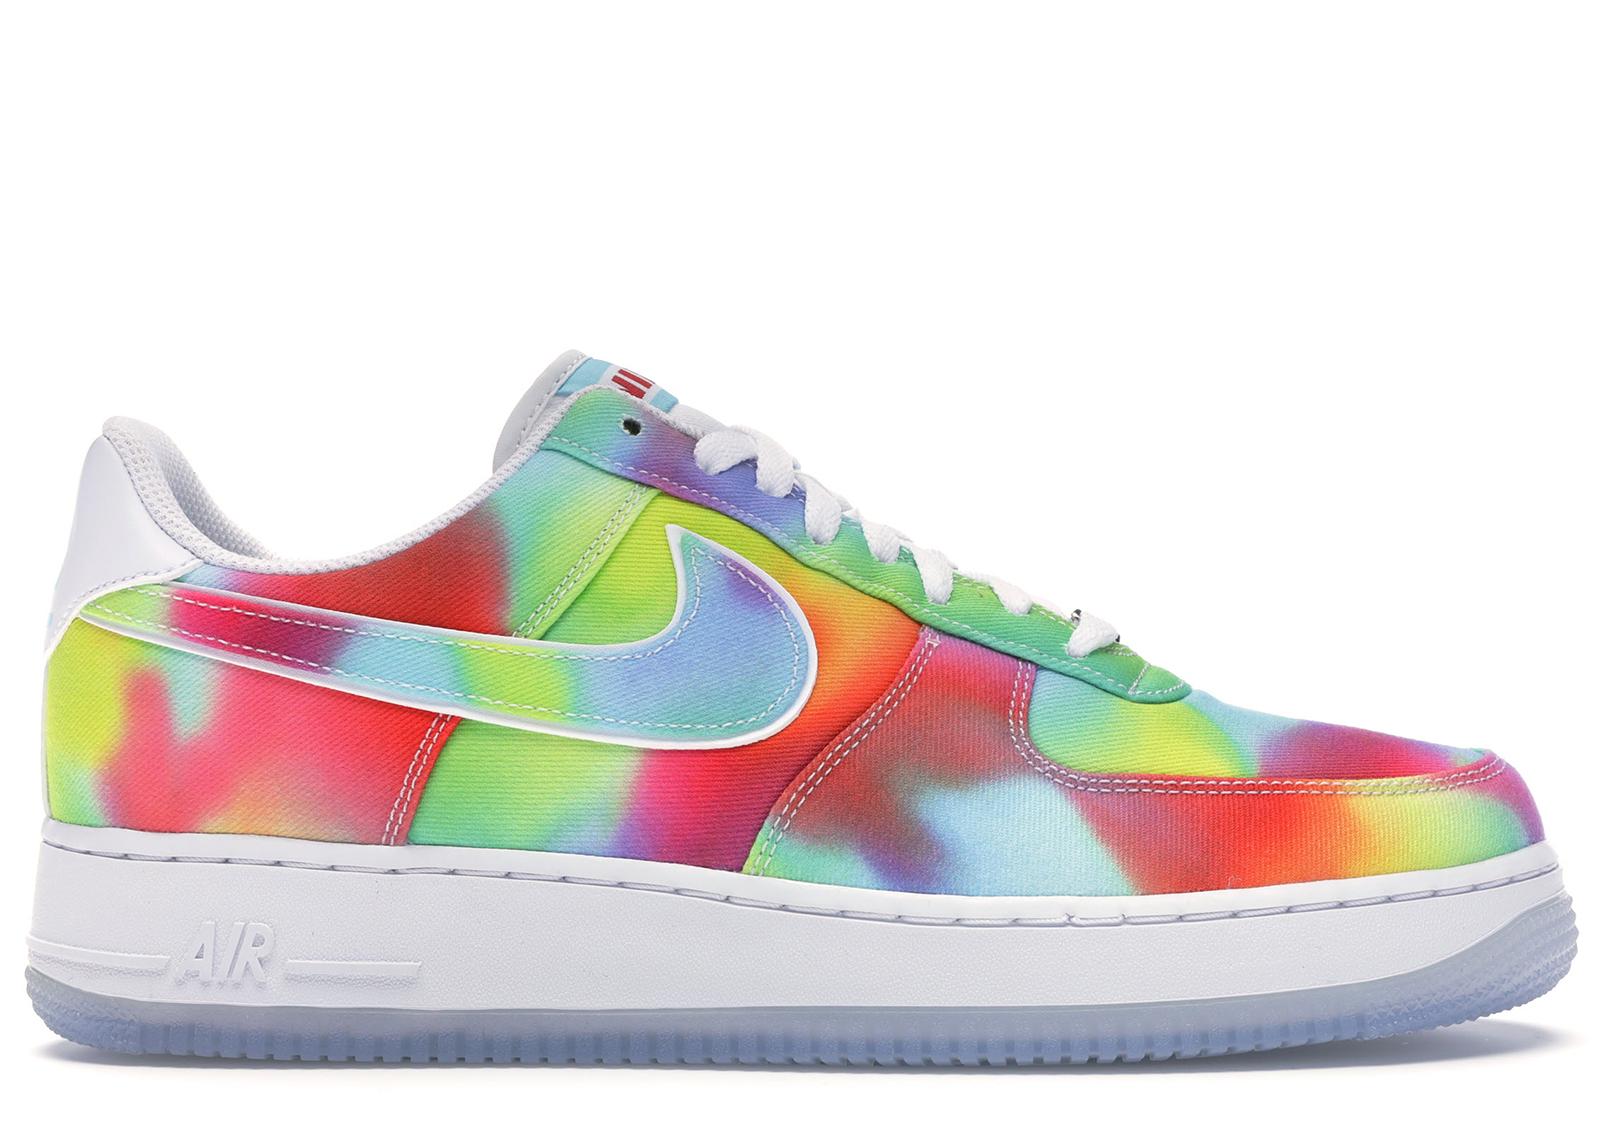 Nike Air Force 1 Low Tie Dye Chicago for Men - Lyst